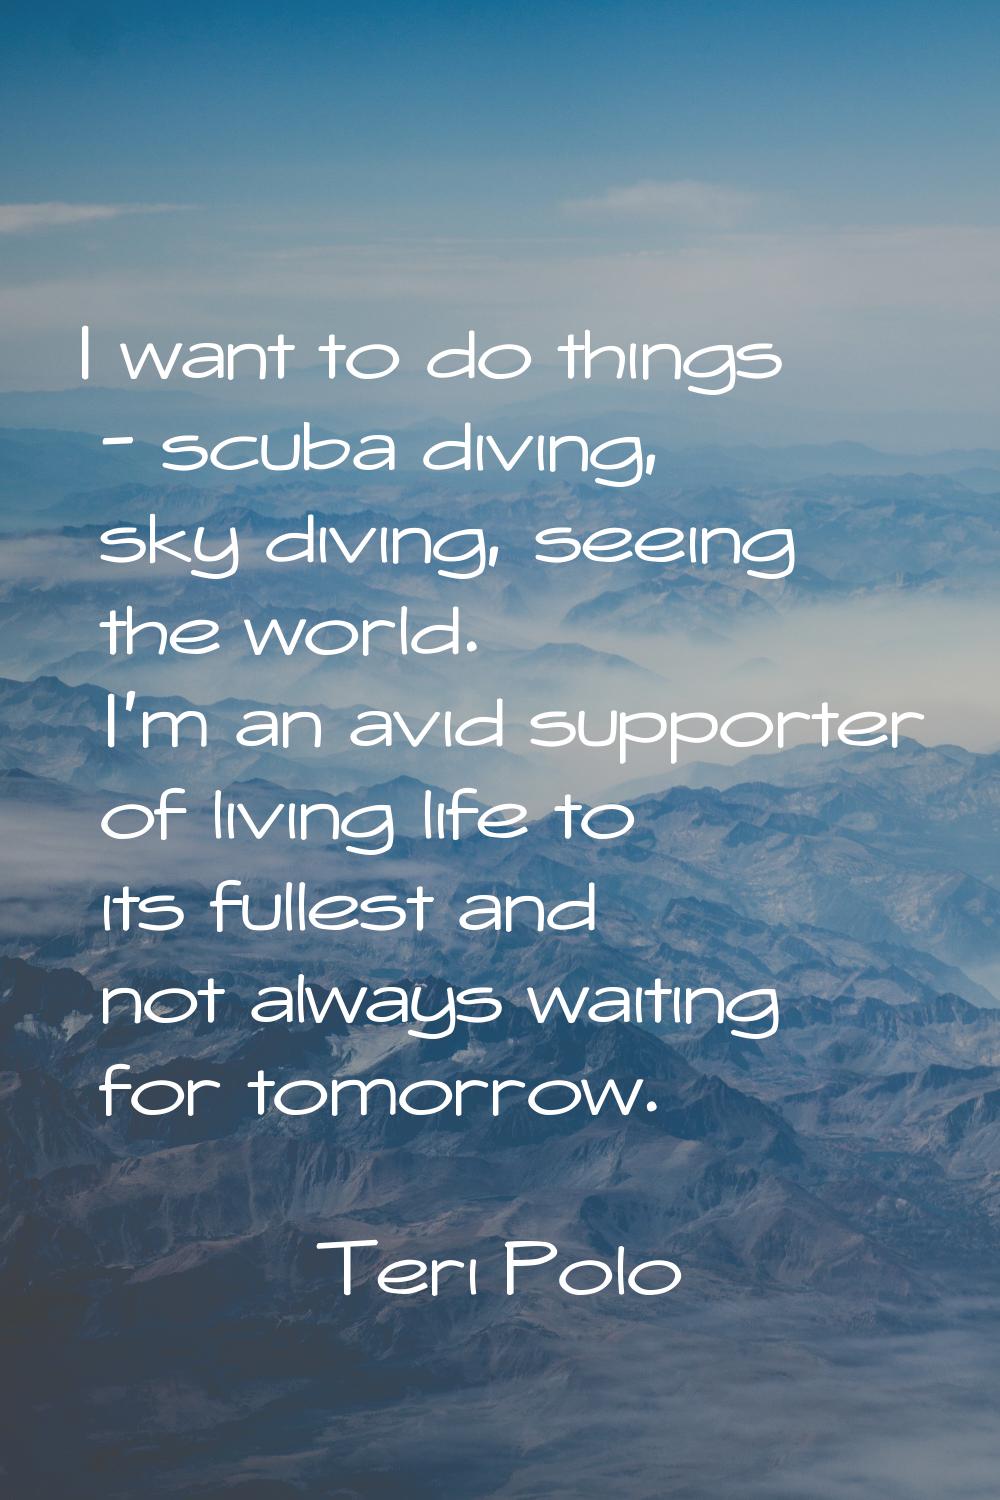 I want to do things - scuba diving, sky diving, seeing the world. I'm an avid supporter of living l